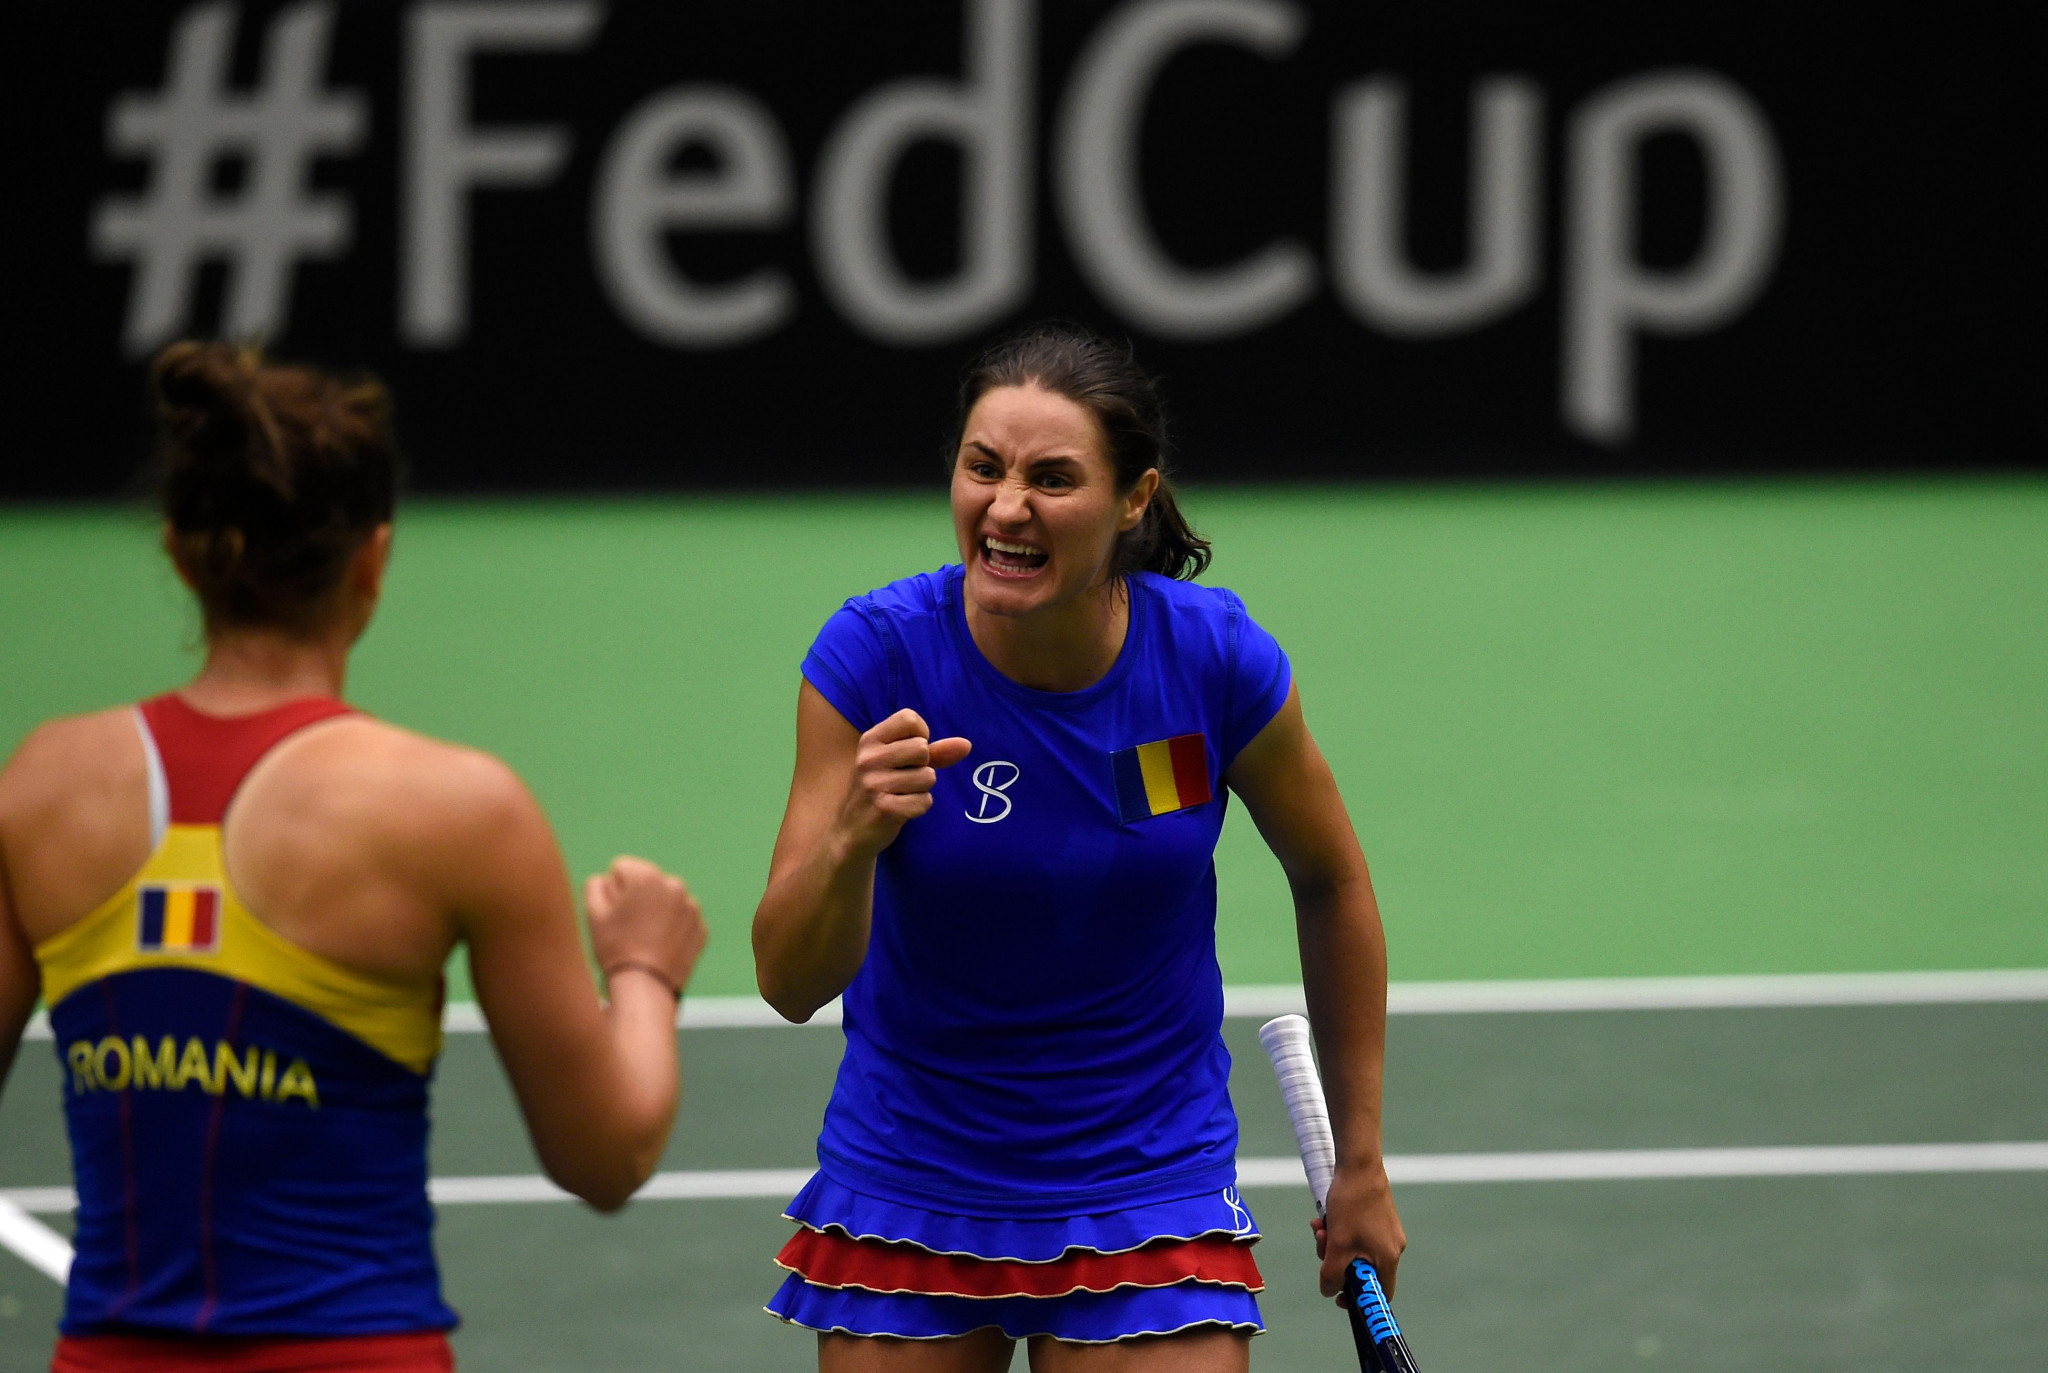 Romania stun defending champions Czech Republic with dramatic Fed Cup victory